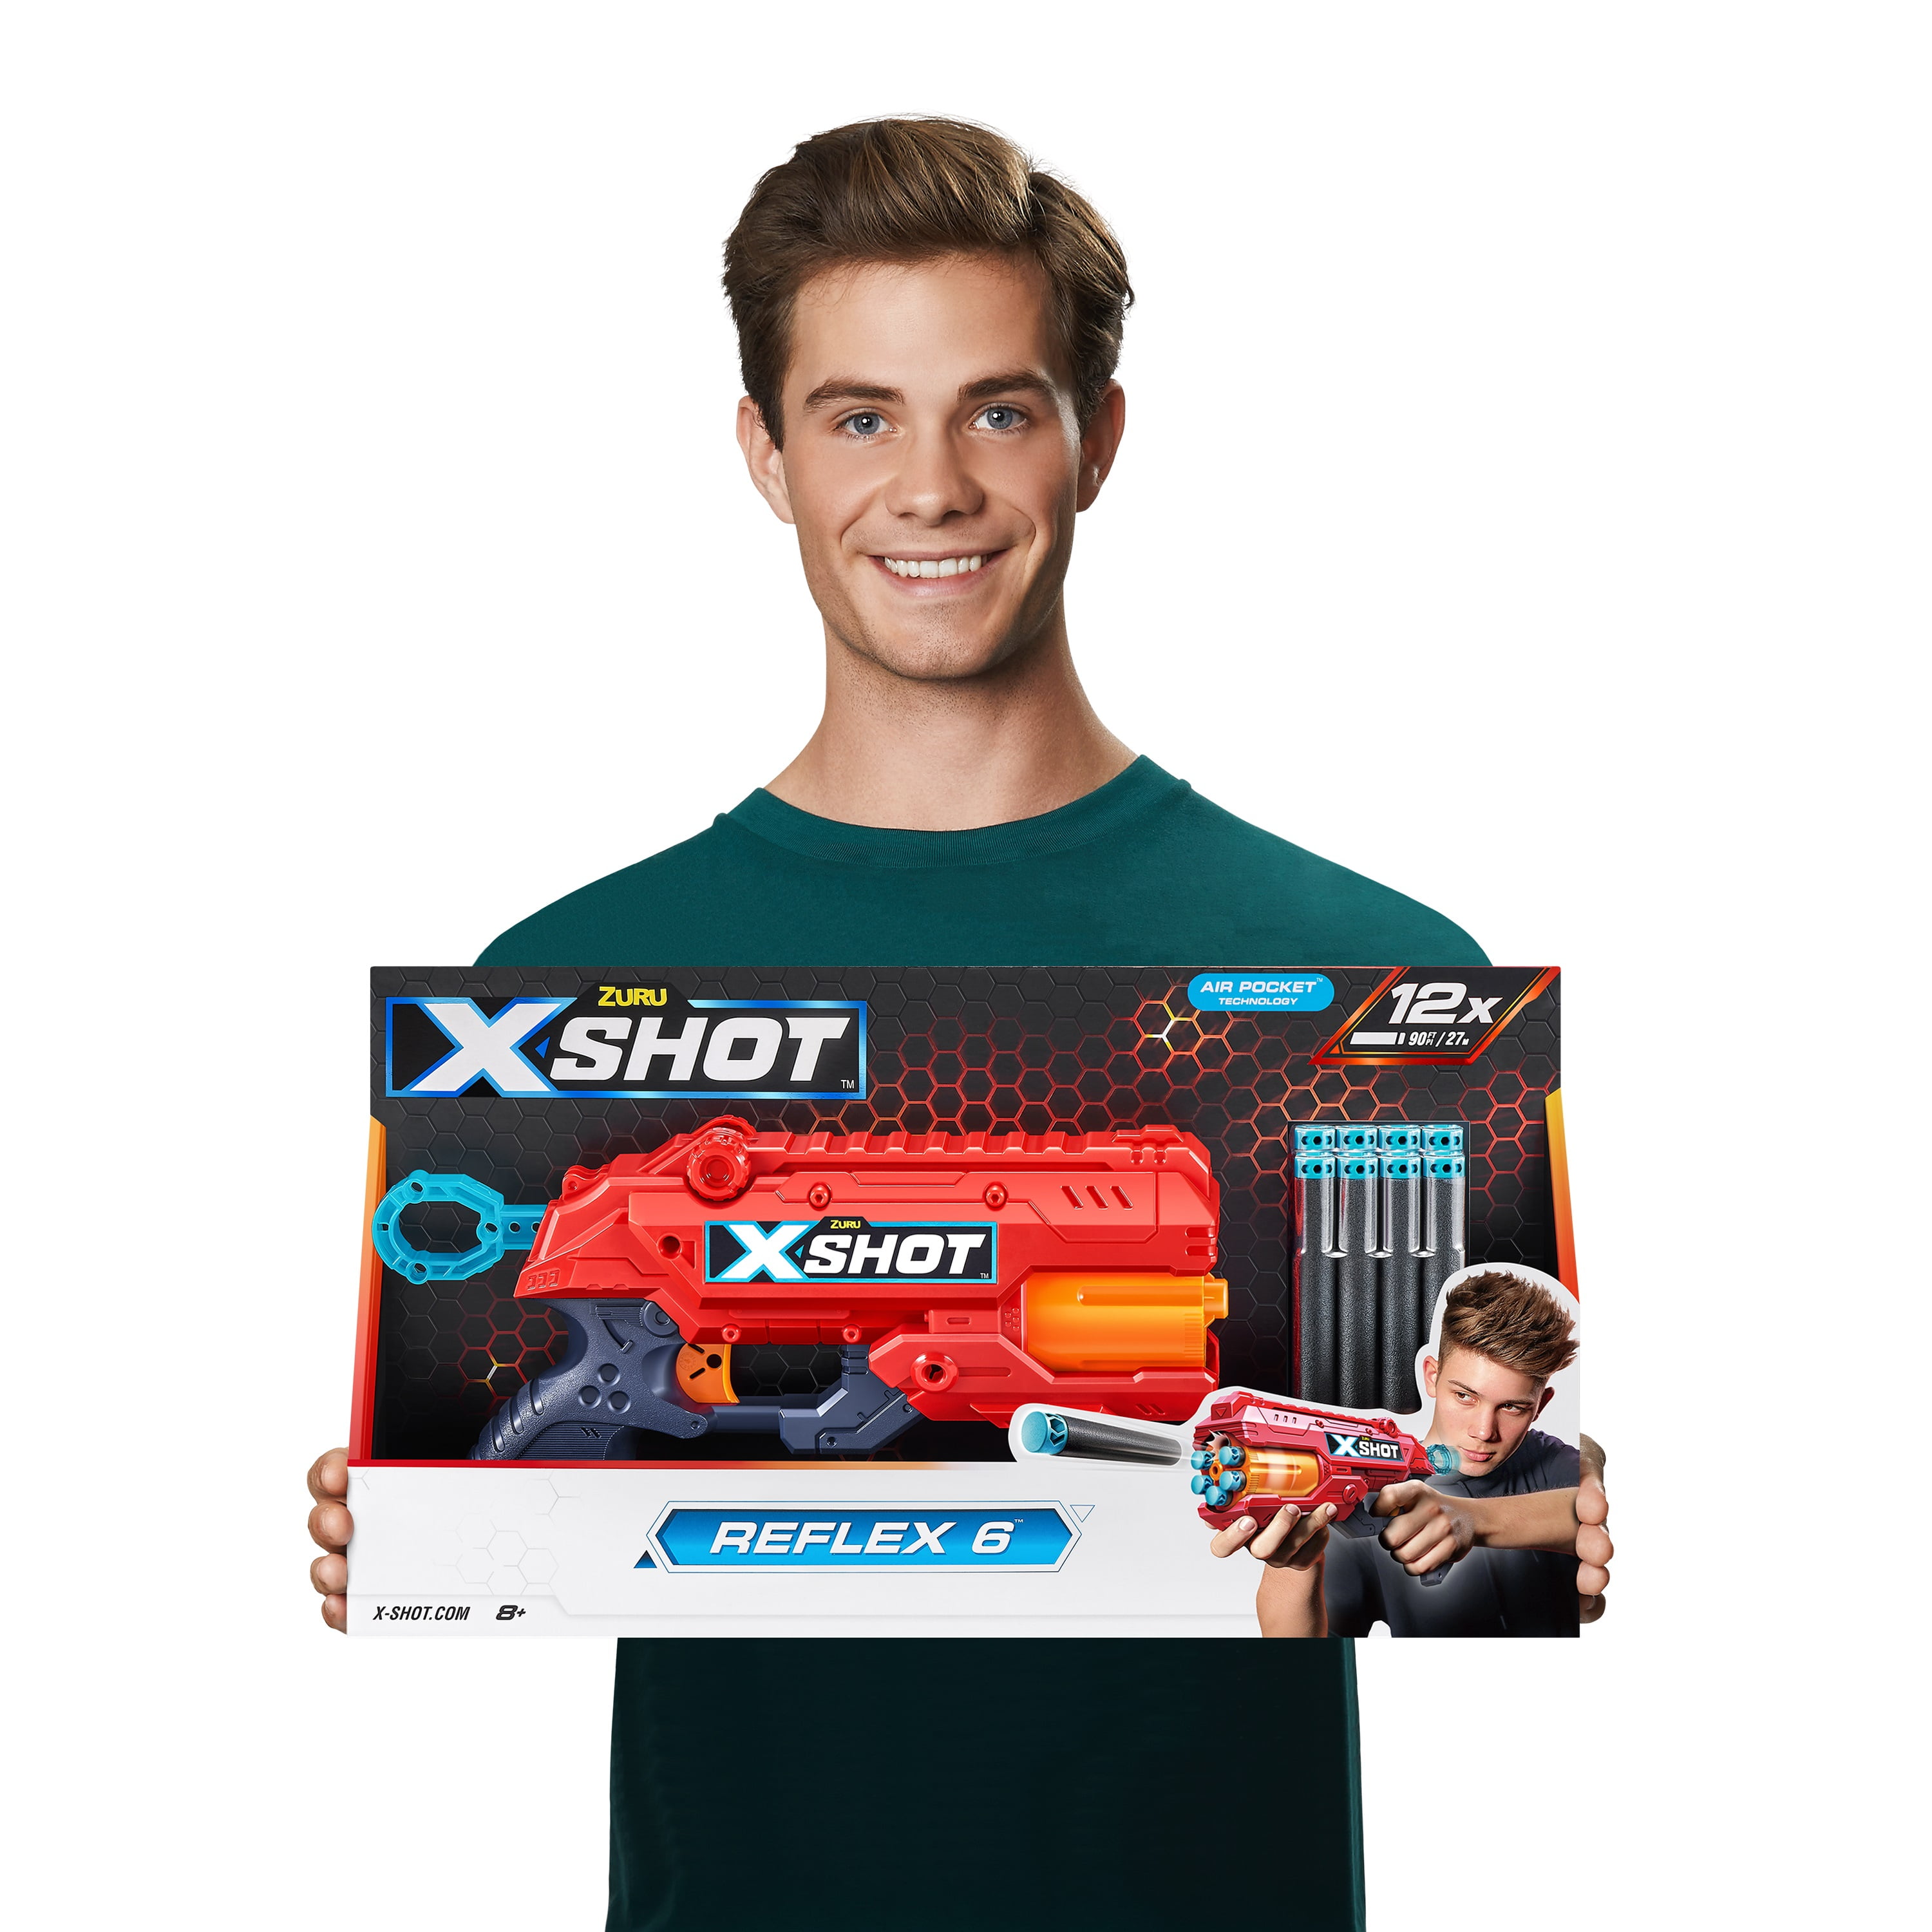 XShot X-Shot Excel Royale Edition Reflex 6 and Kickback Combo Pack (3 Cans  + 16 Darts) by ZURU, Golden Foam Dart Blaster, Easy Reload, Toy, Shooting